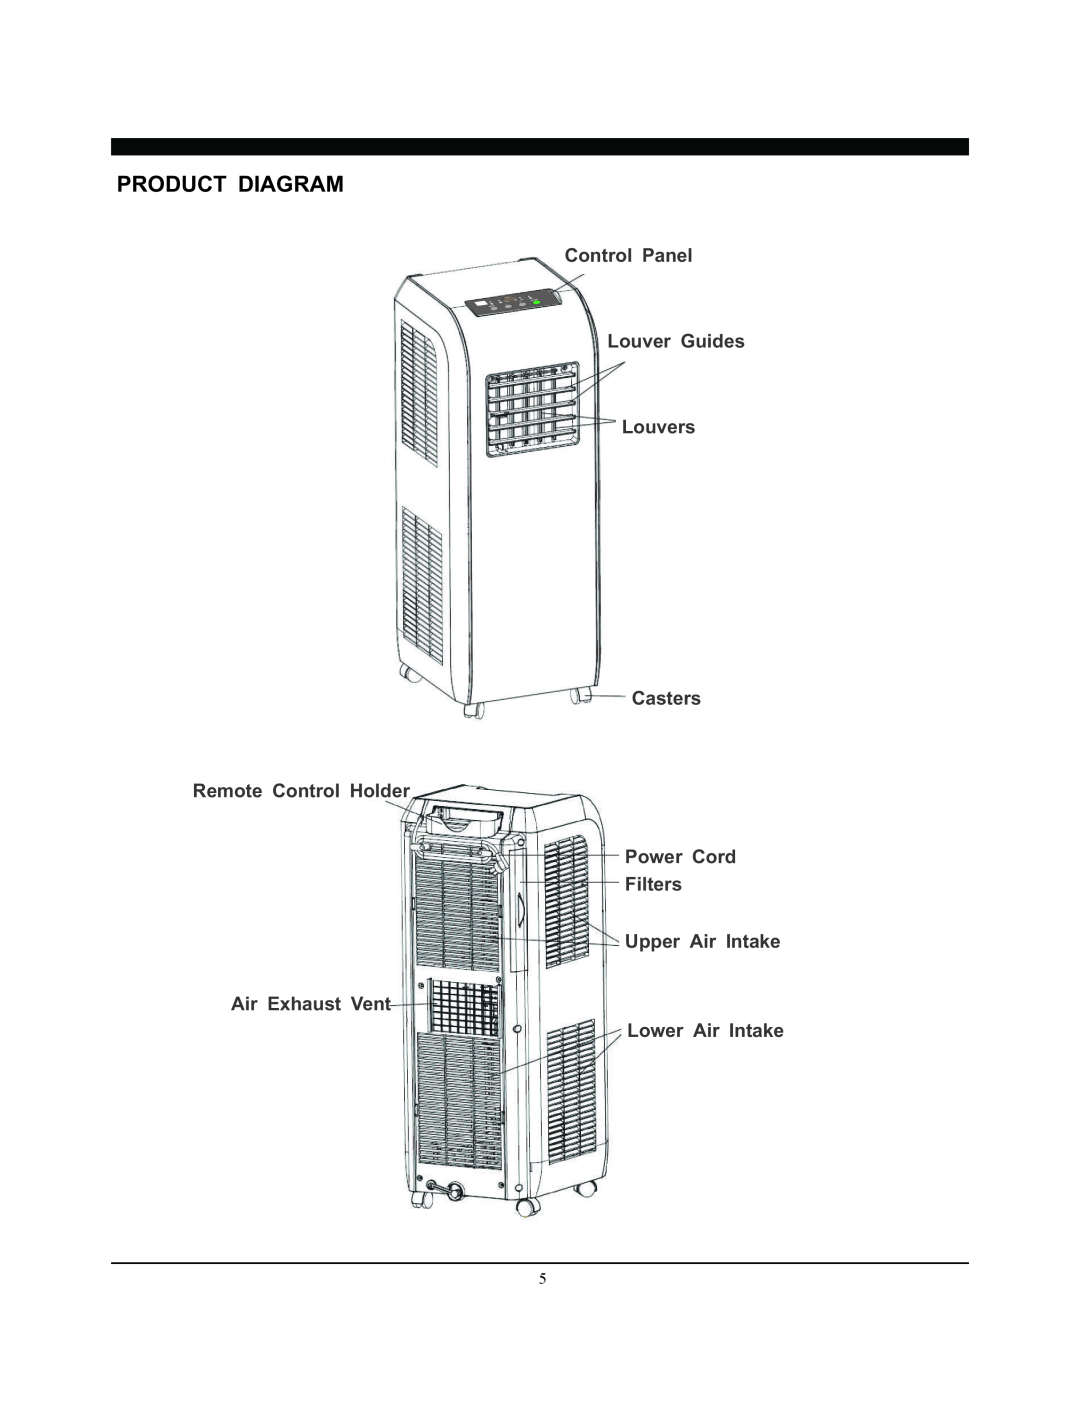 Soleus Air SG-PAC-08E3 (KY-80) manual Product Diagram, Control Panel Louver Guides Louvers Casters, Lower Air Intake 